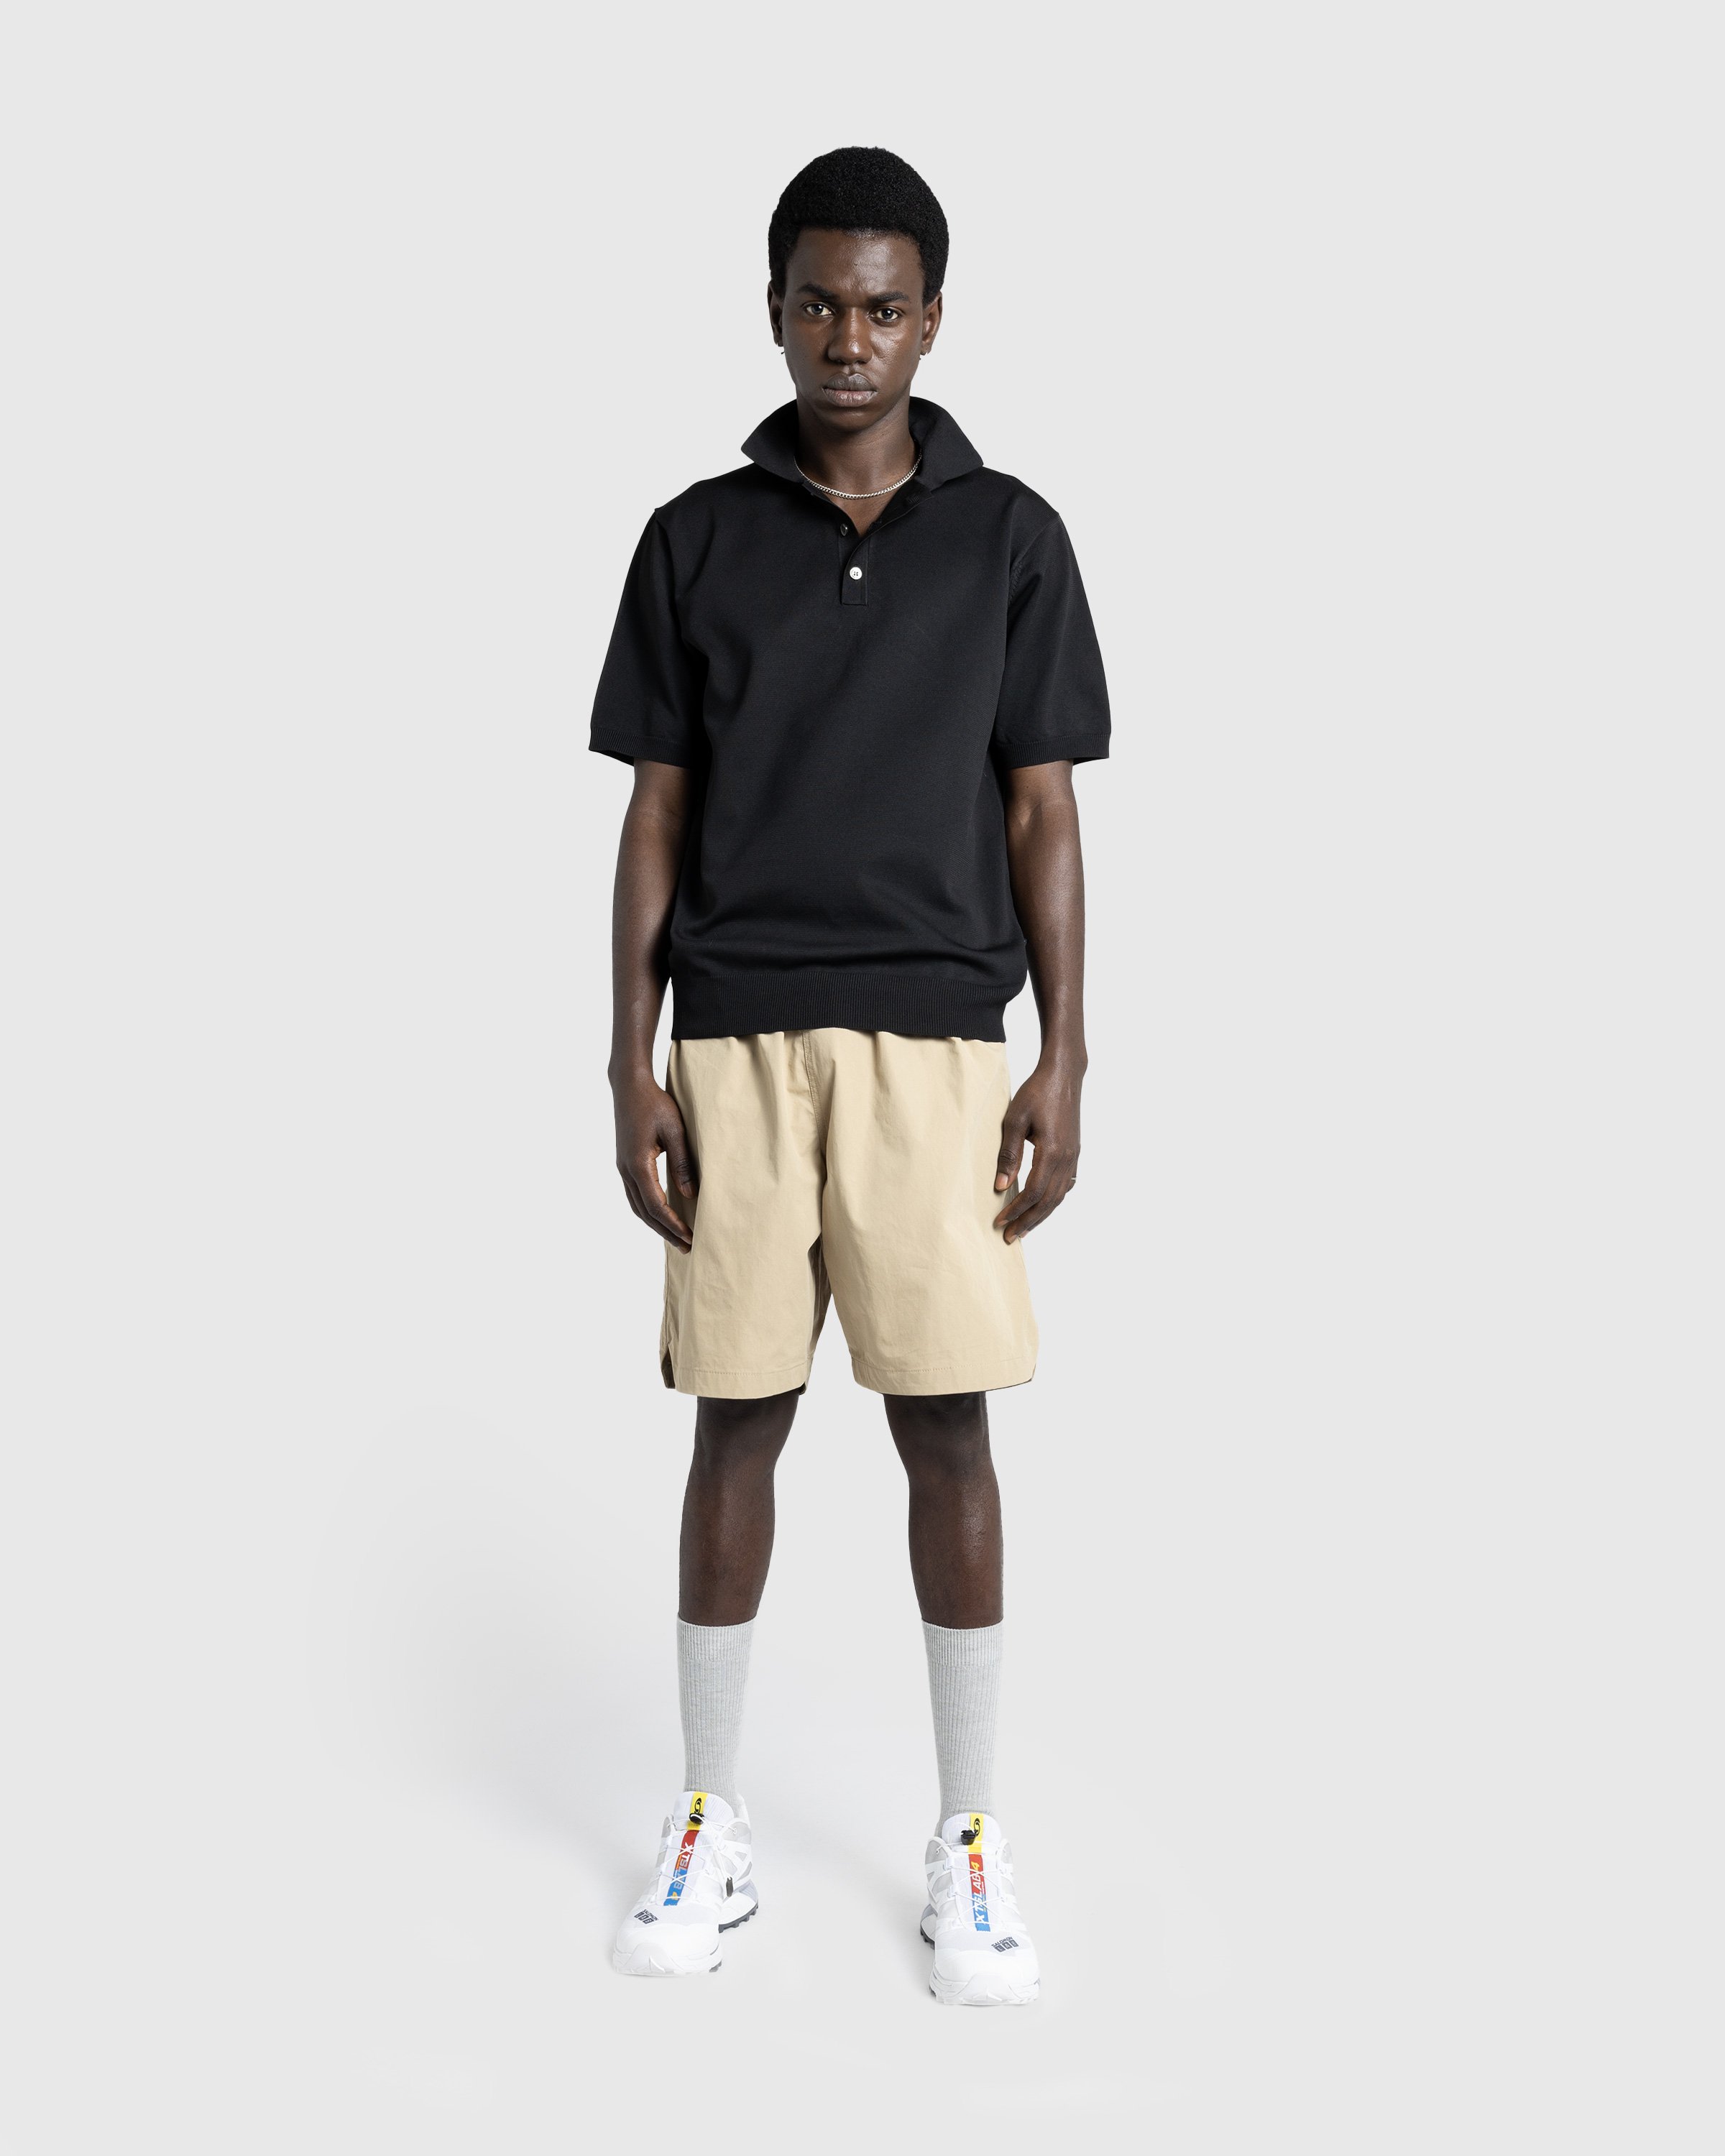 Highsnobiety HS05 - Poly SS Knit Polo - Clothing - Black - Image 4